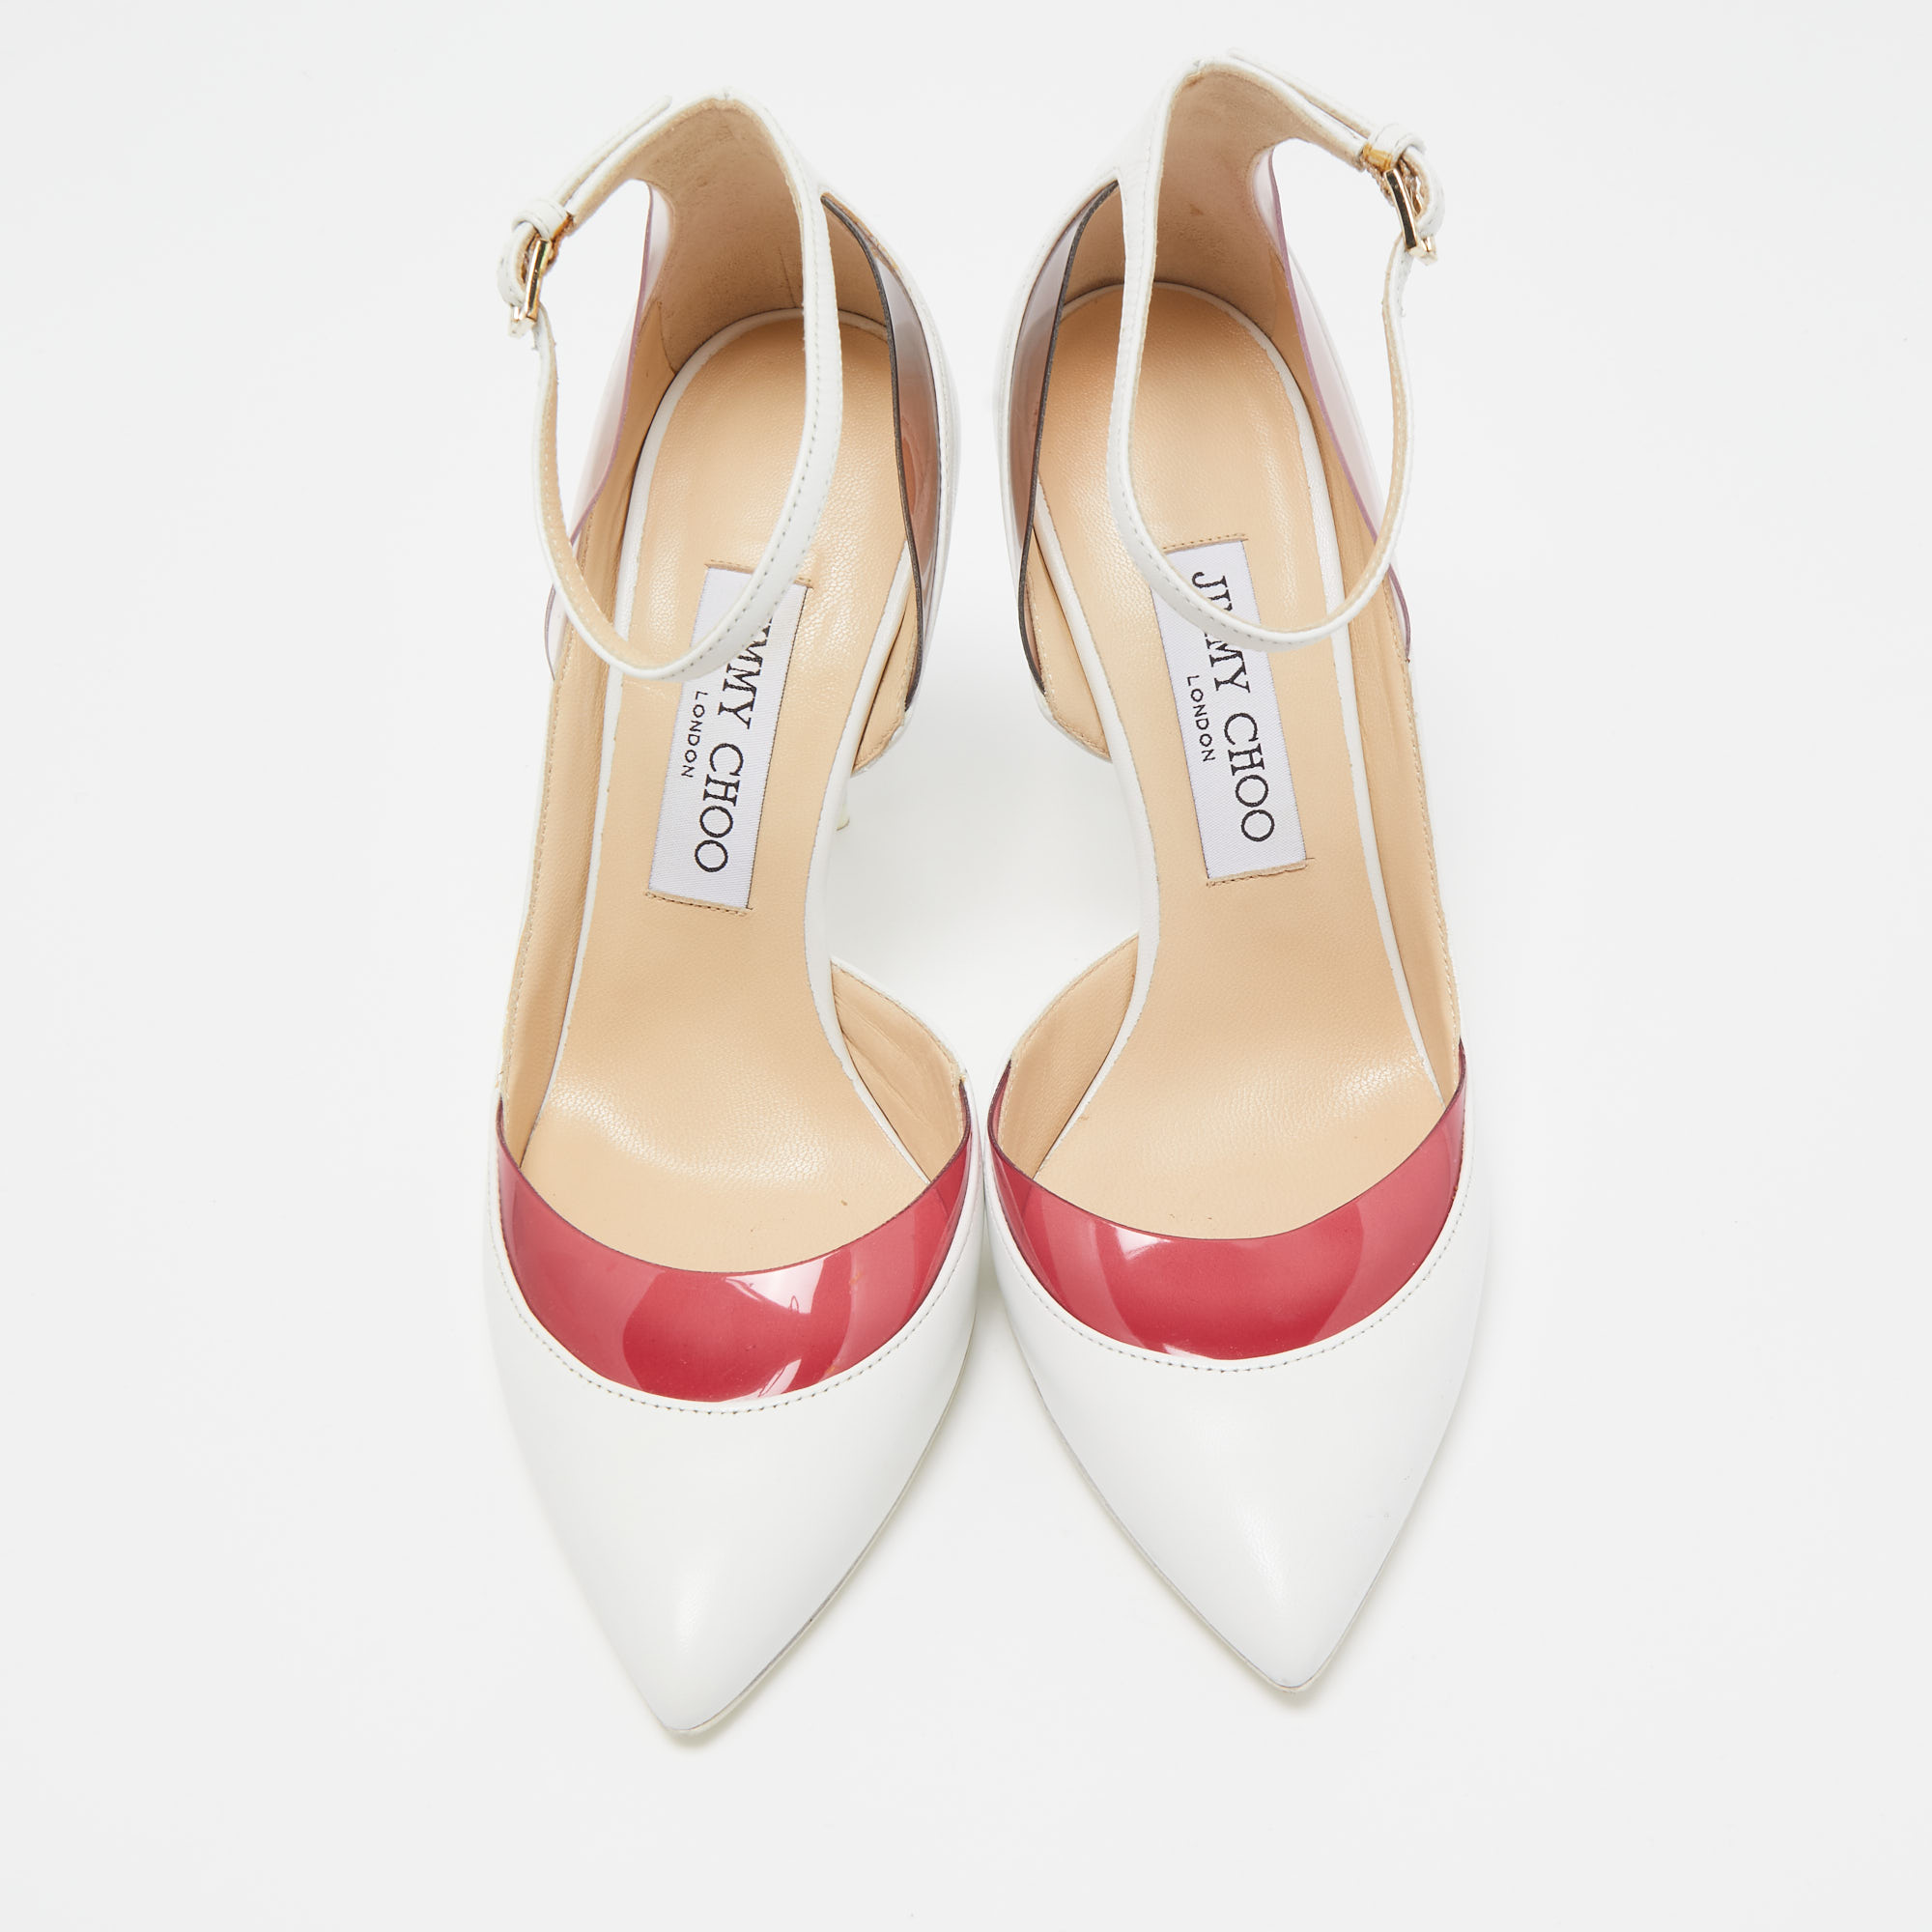 Jimmy Choo White/Pink Leather And PVC D'orsay Pointed Toe Ankle Strap Pumps Size 37